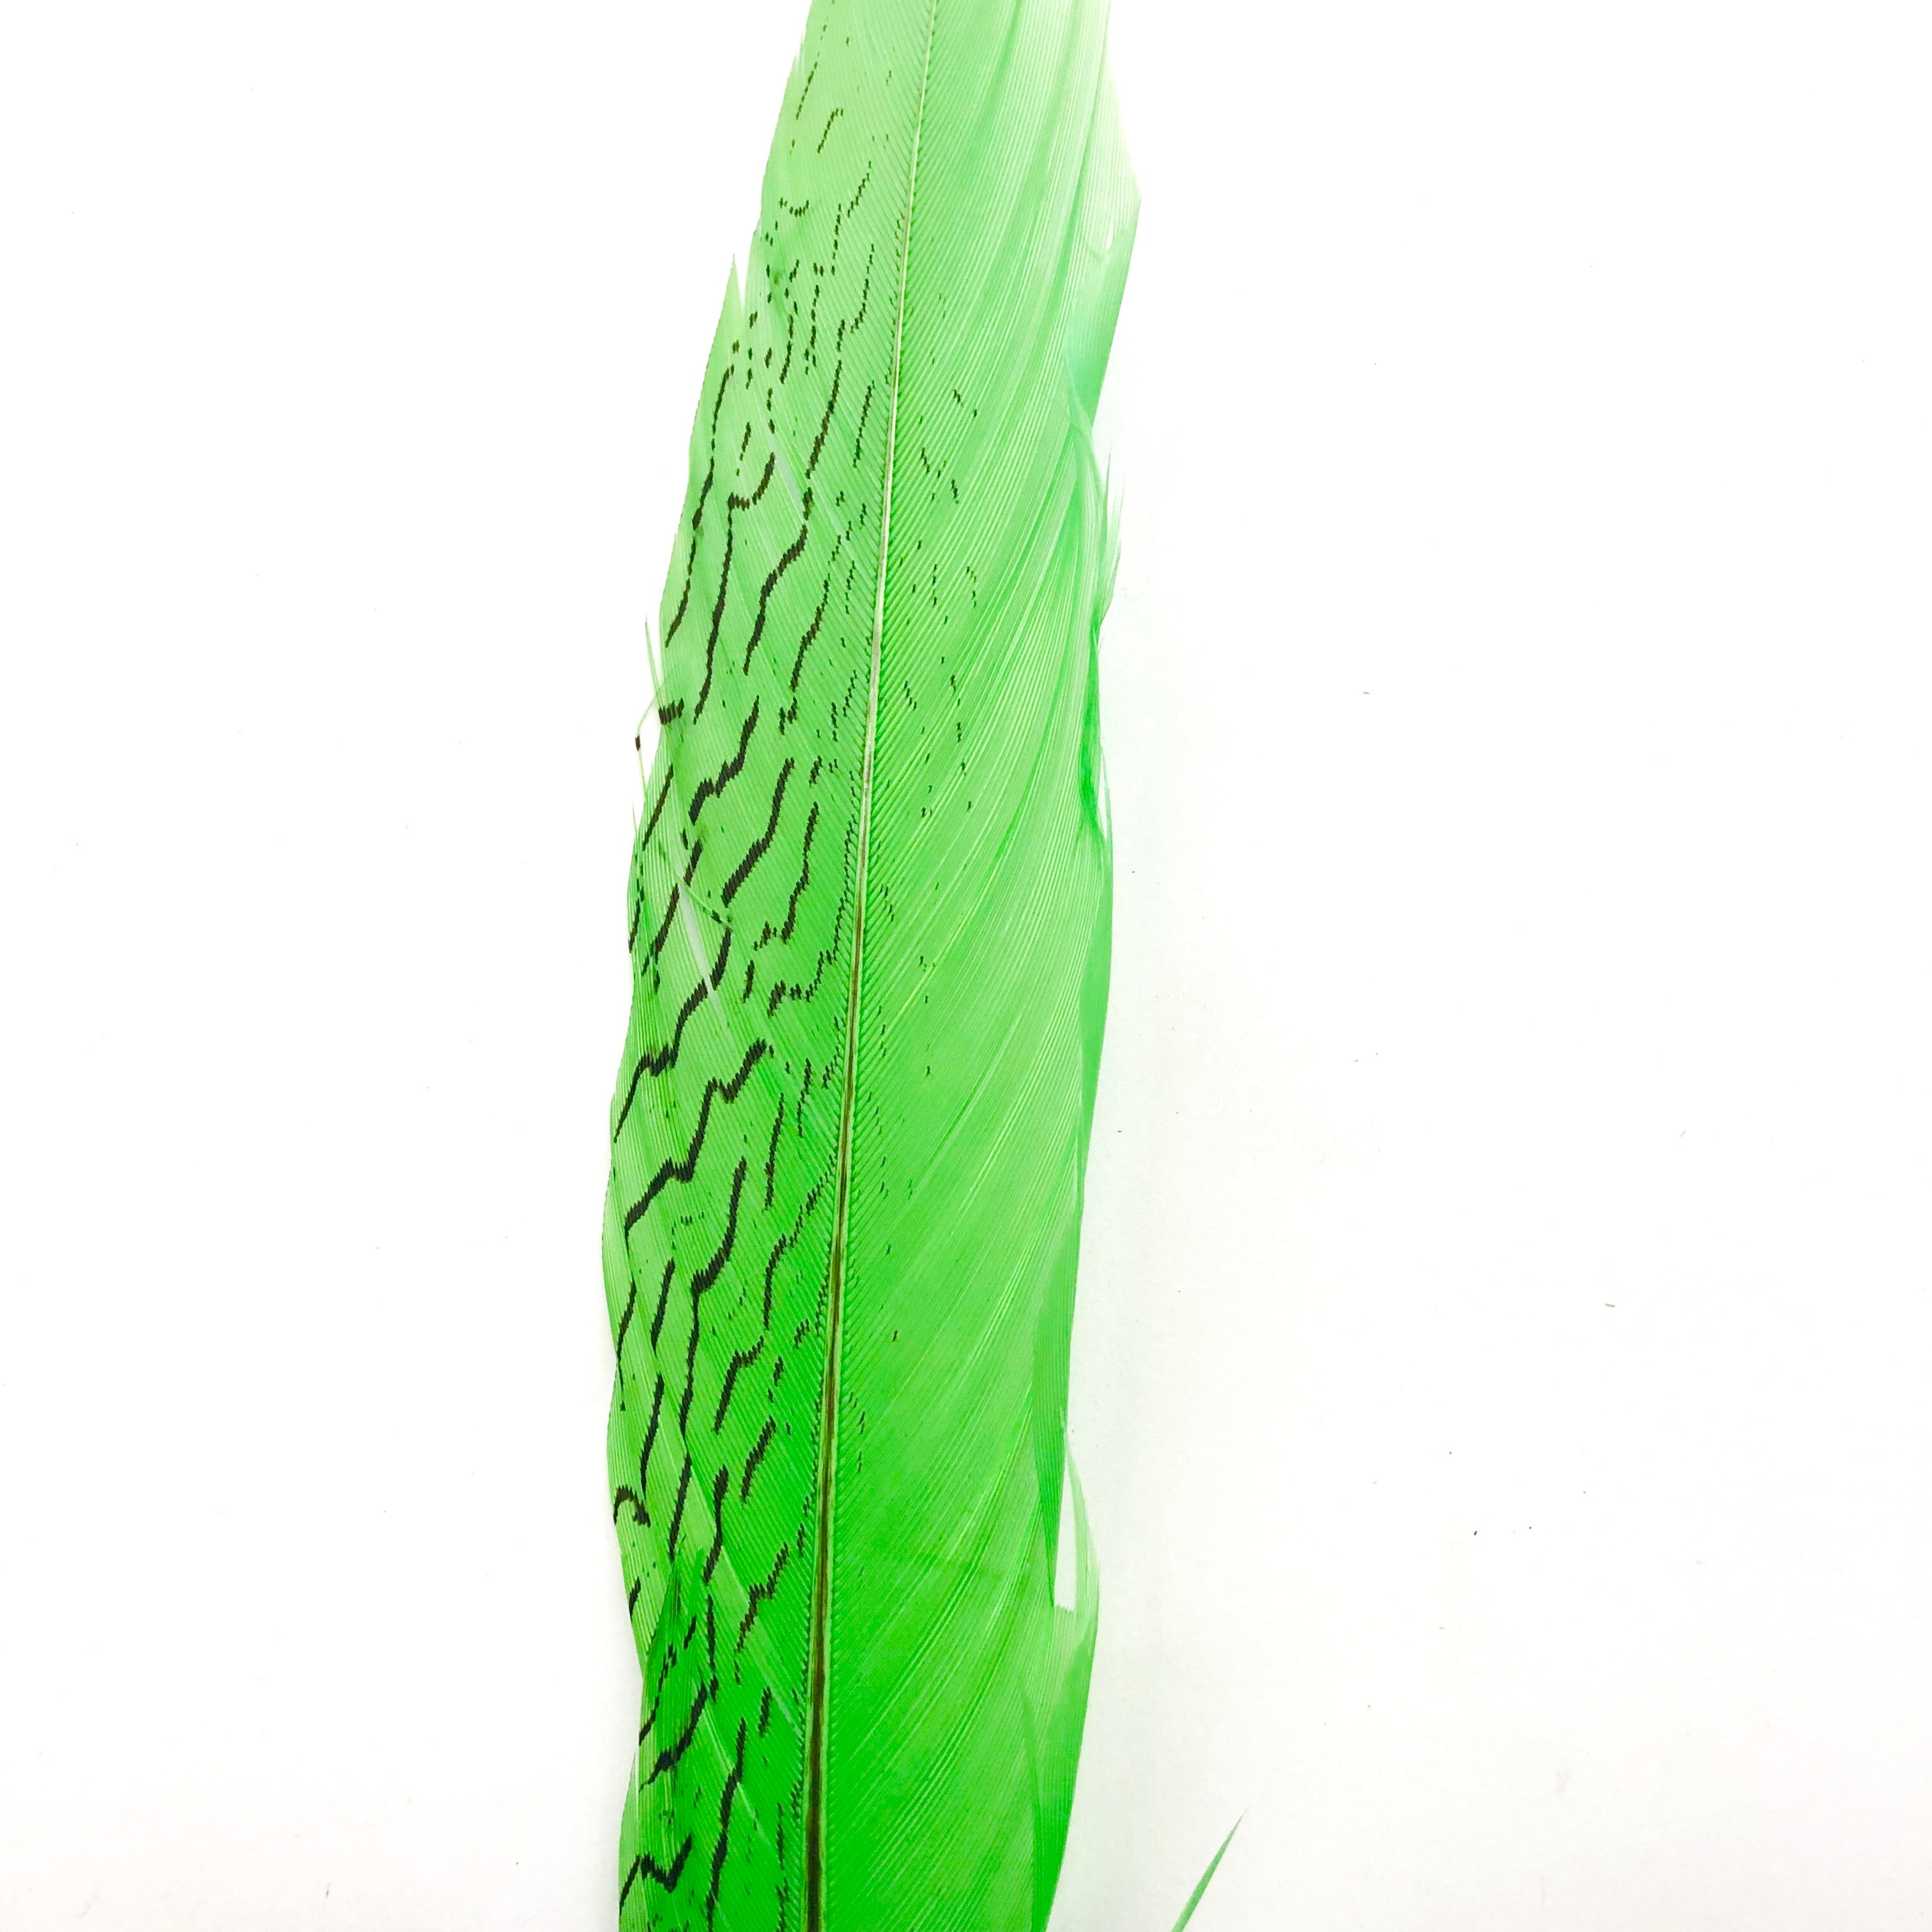 10" To 20" Silver Pheasant Tail Feather - Lime Green ((SECONDS))